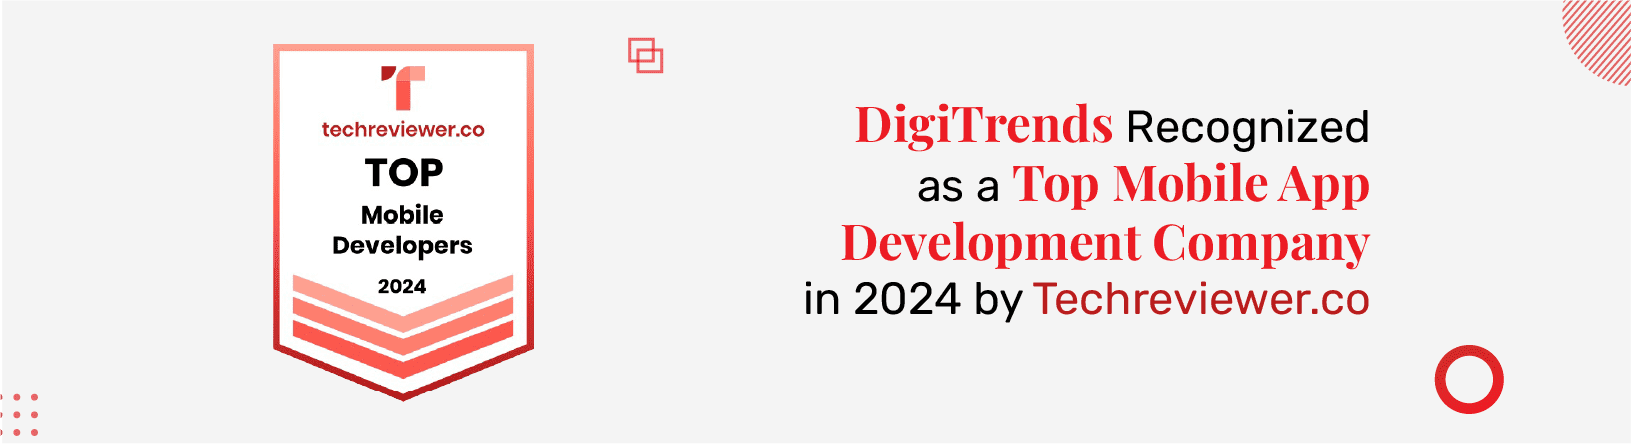 DigiTrends Recognized as a Top Mobile App Development Company in 2024 by Techreviewer.co